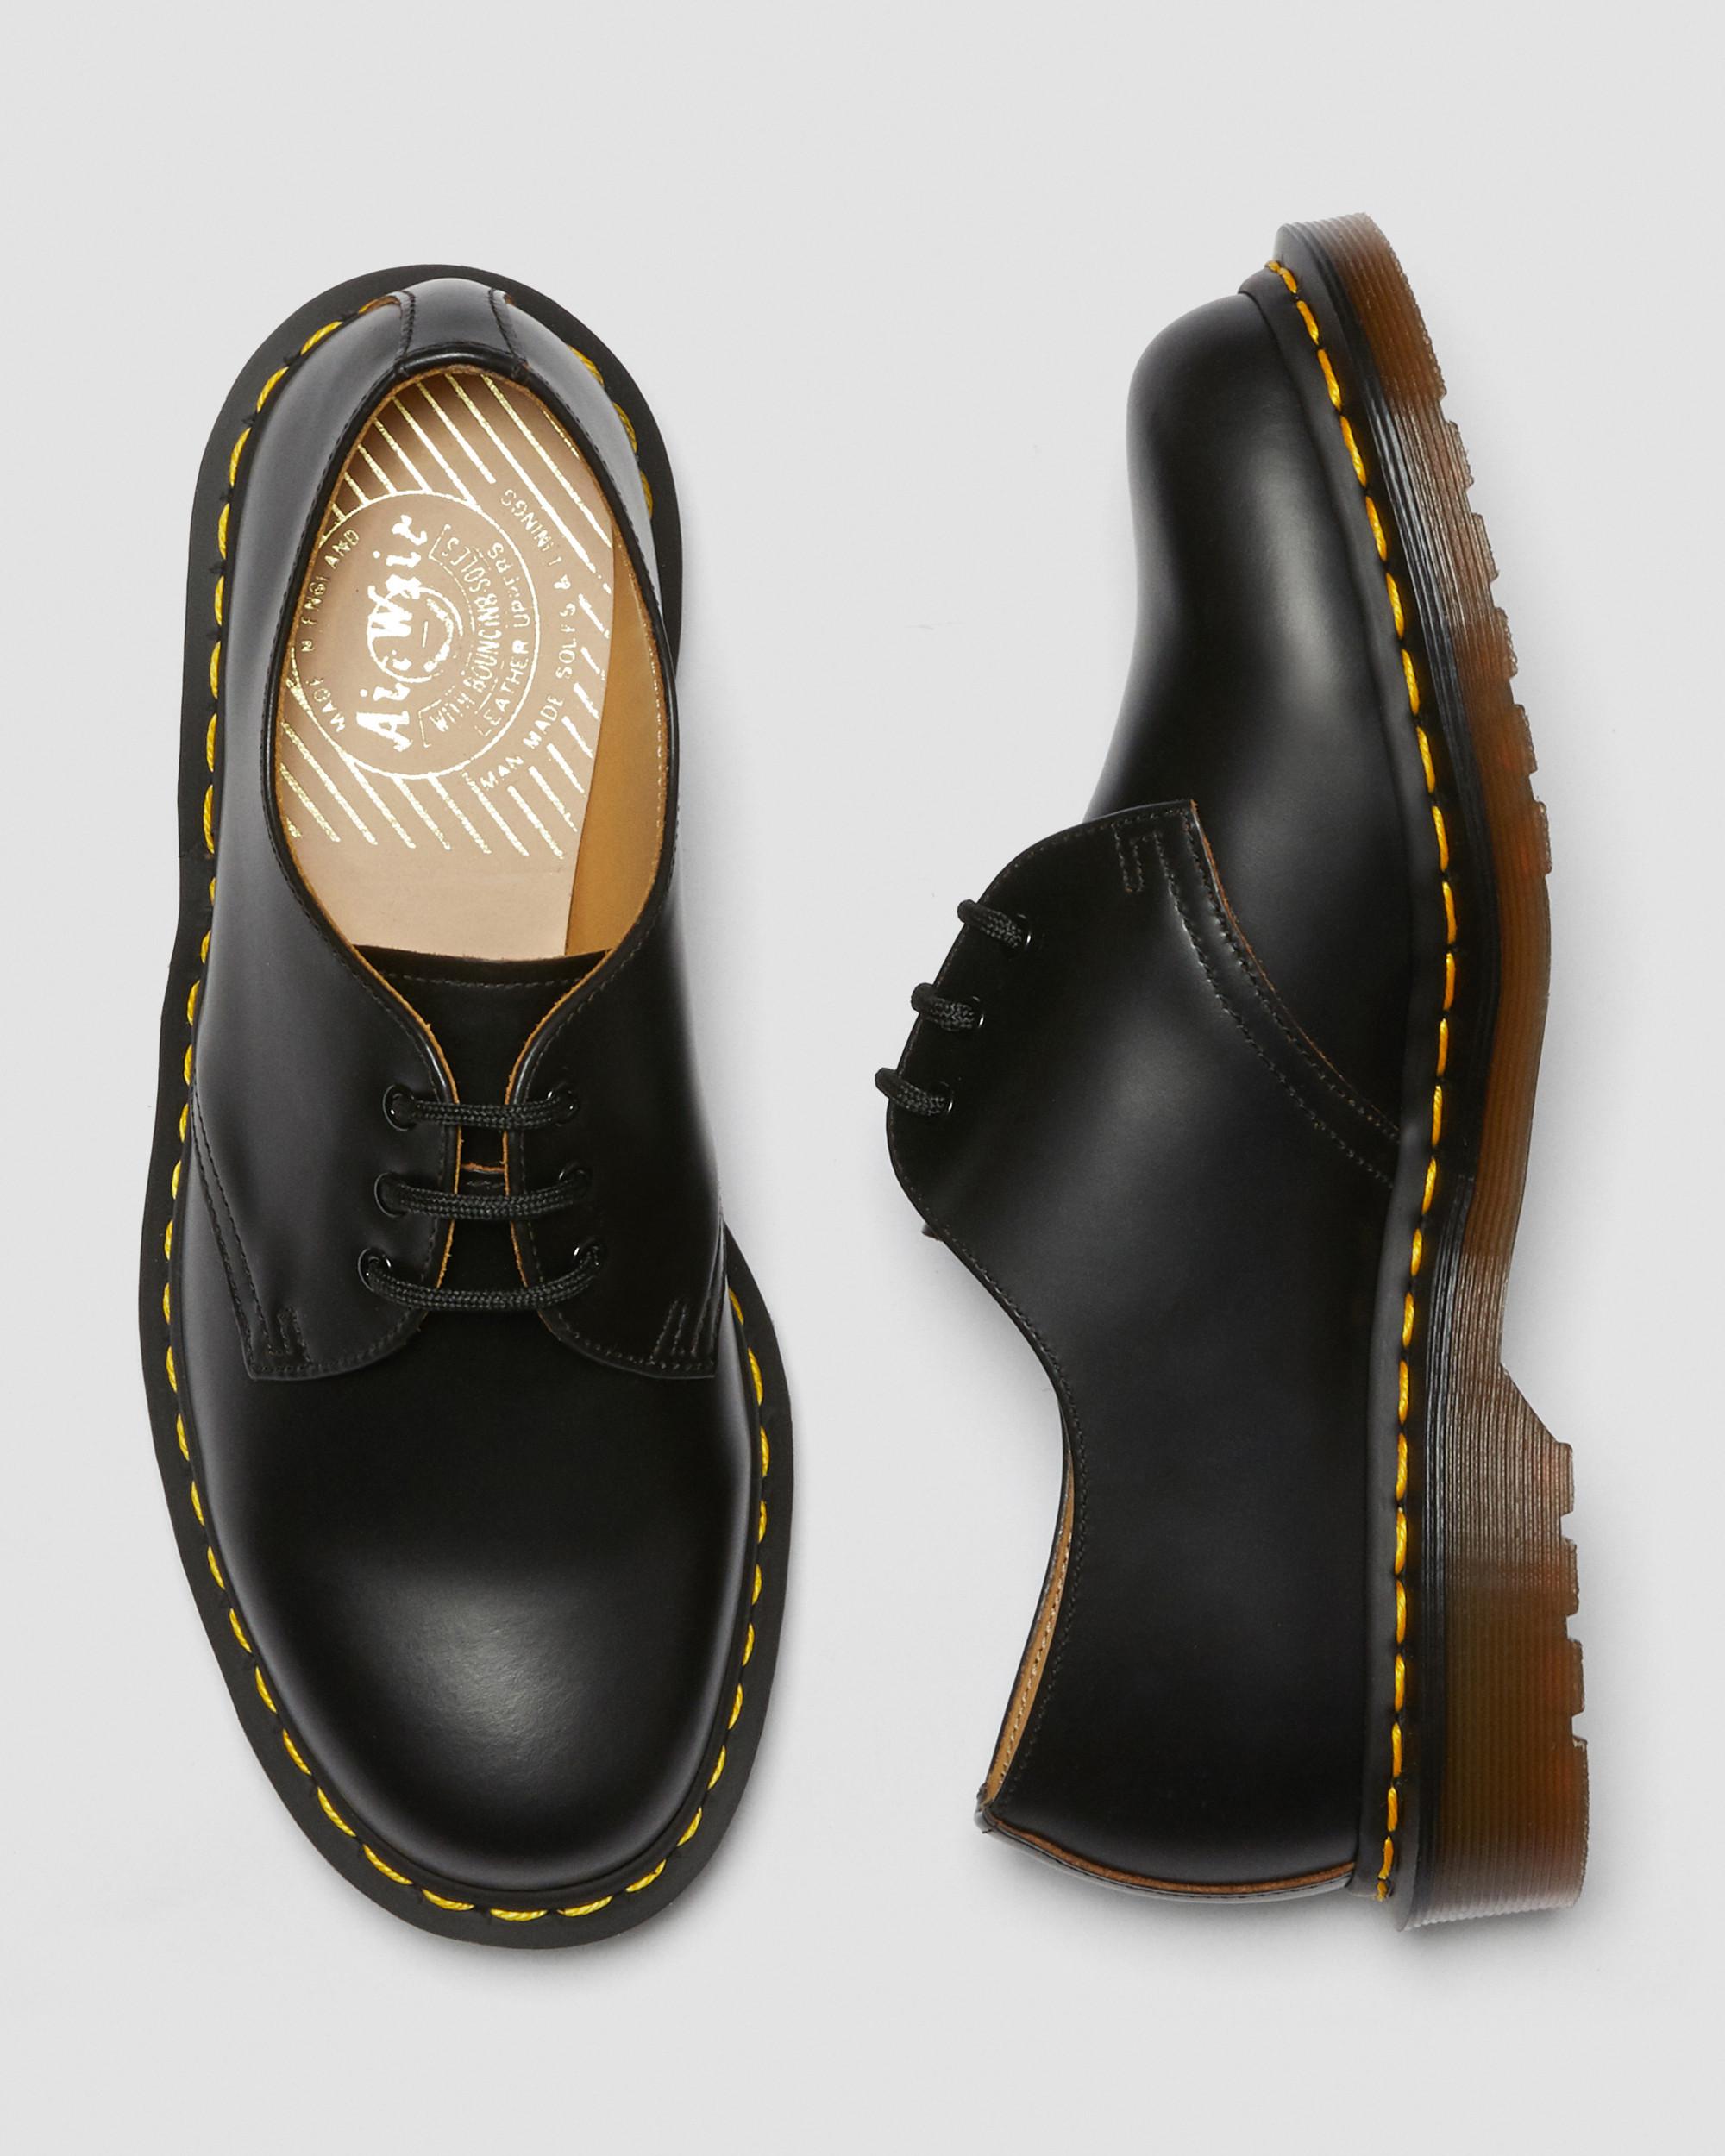 Dr.Martens MADE IN ENGLAND 1461購入手続きお待ちしております